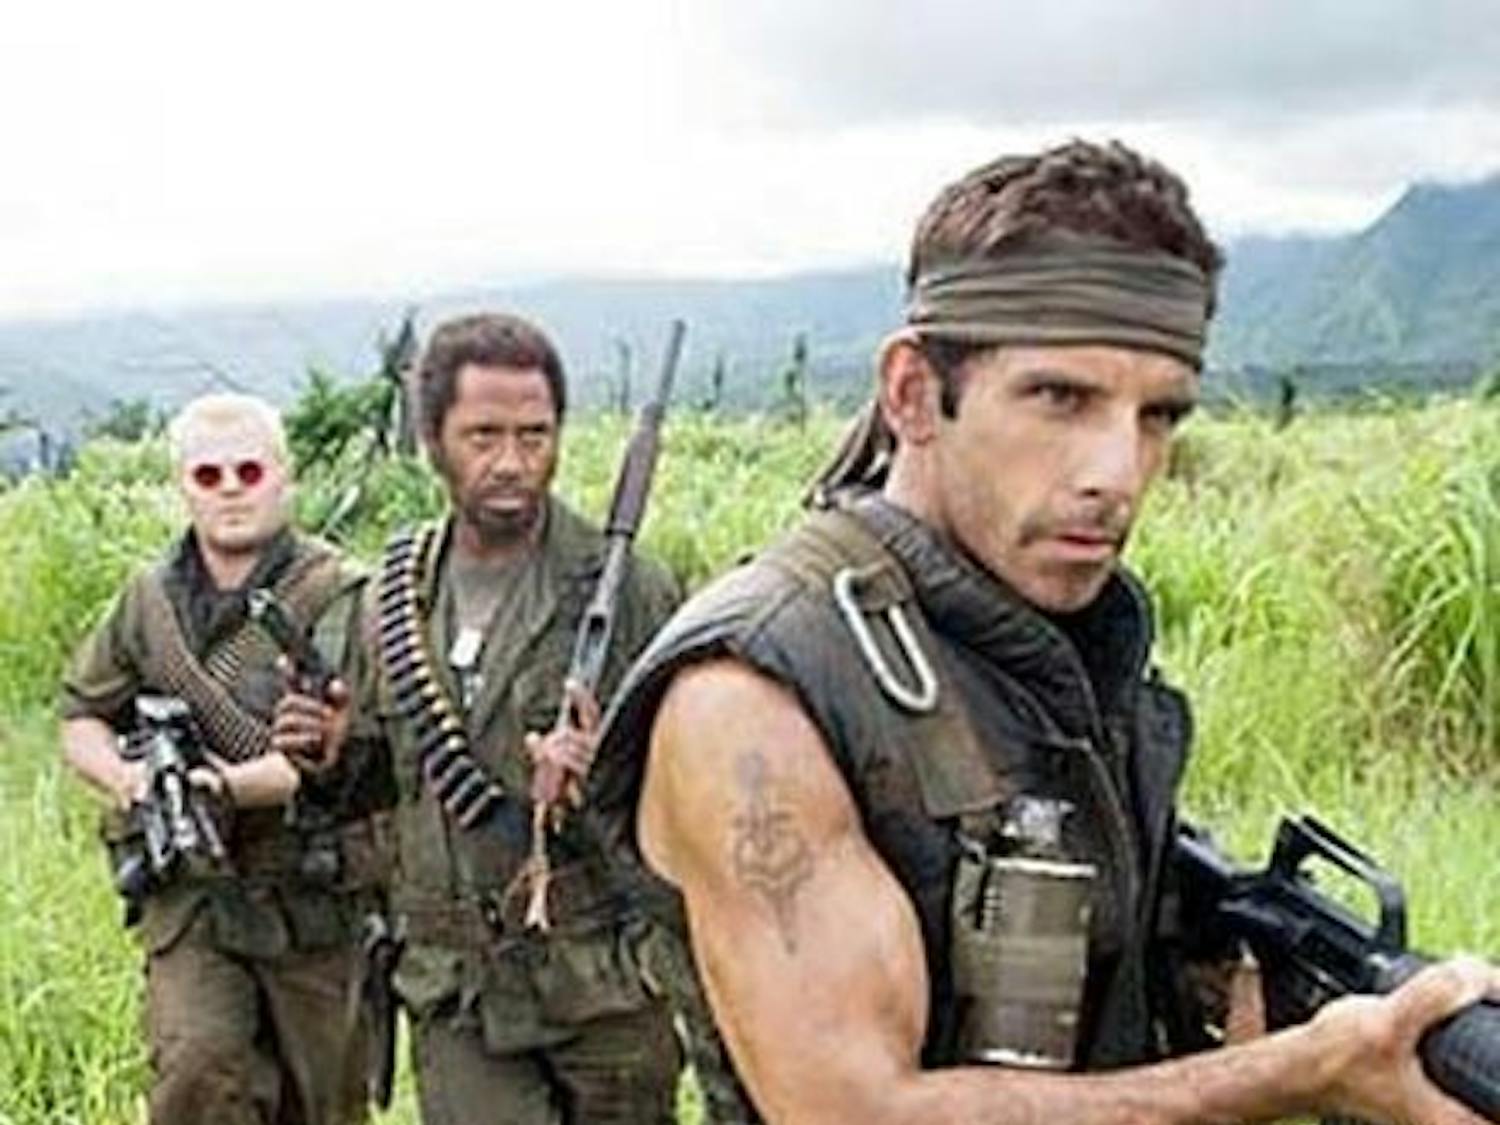 Despite offending some groups, Tropic Thunder is a comedy success.